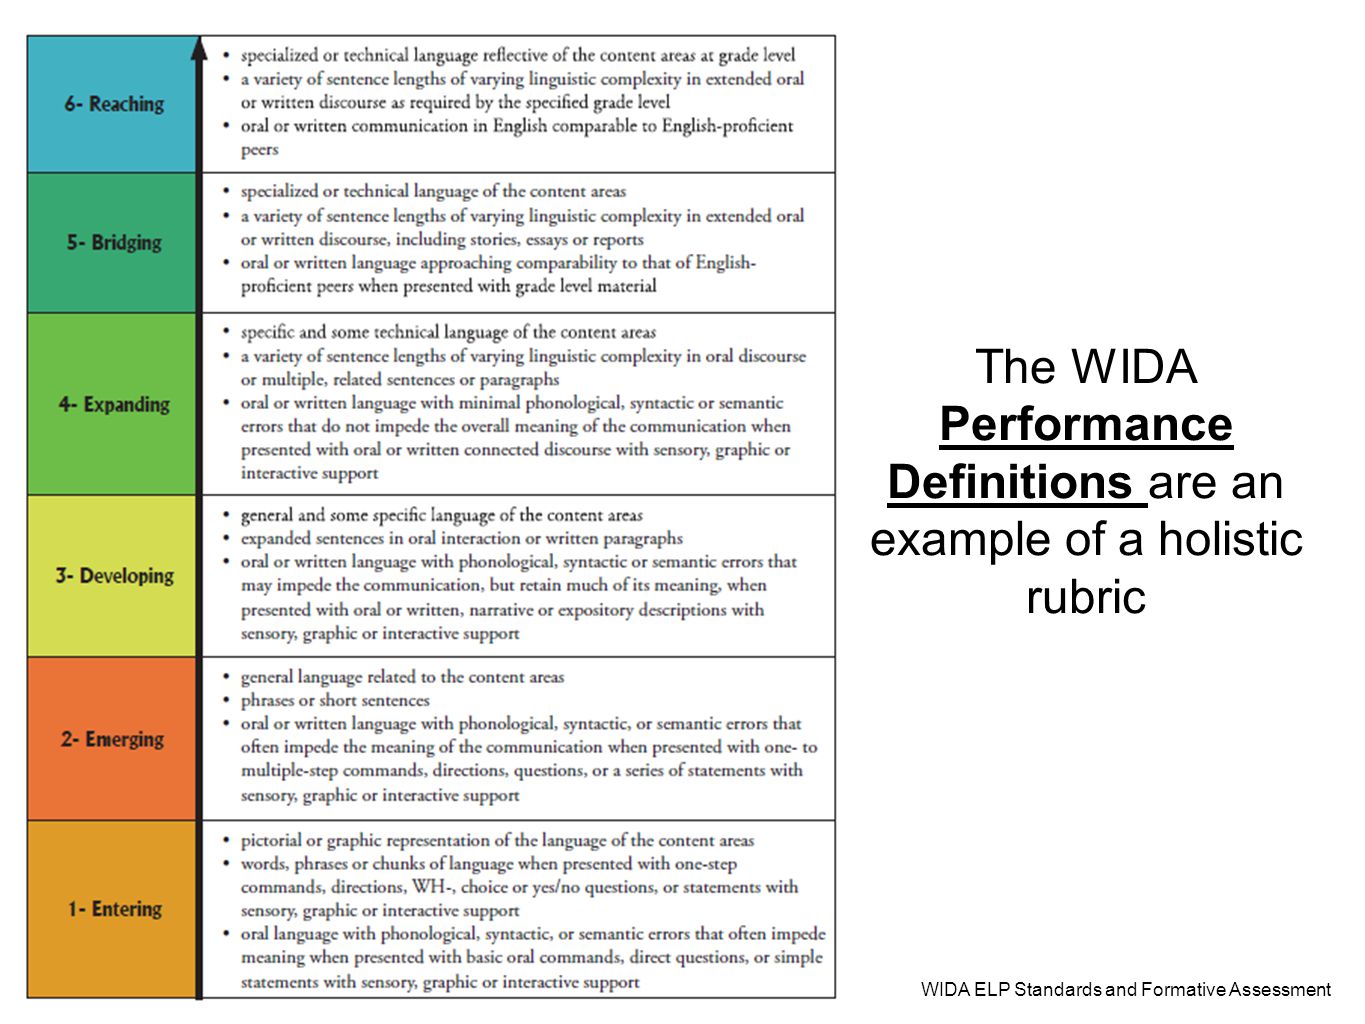 The WIDA Performance Definitions are an example of a holistic rubric